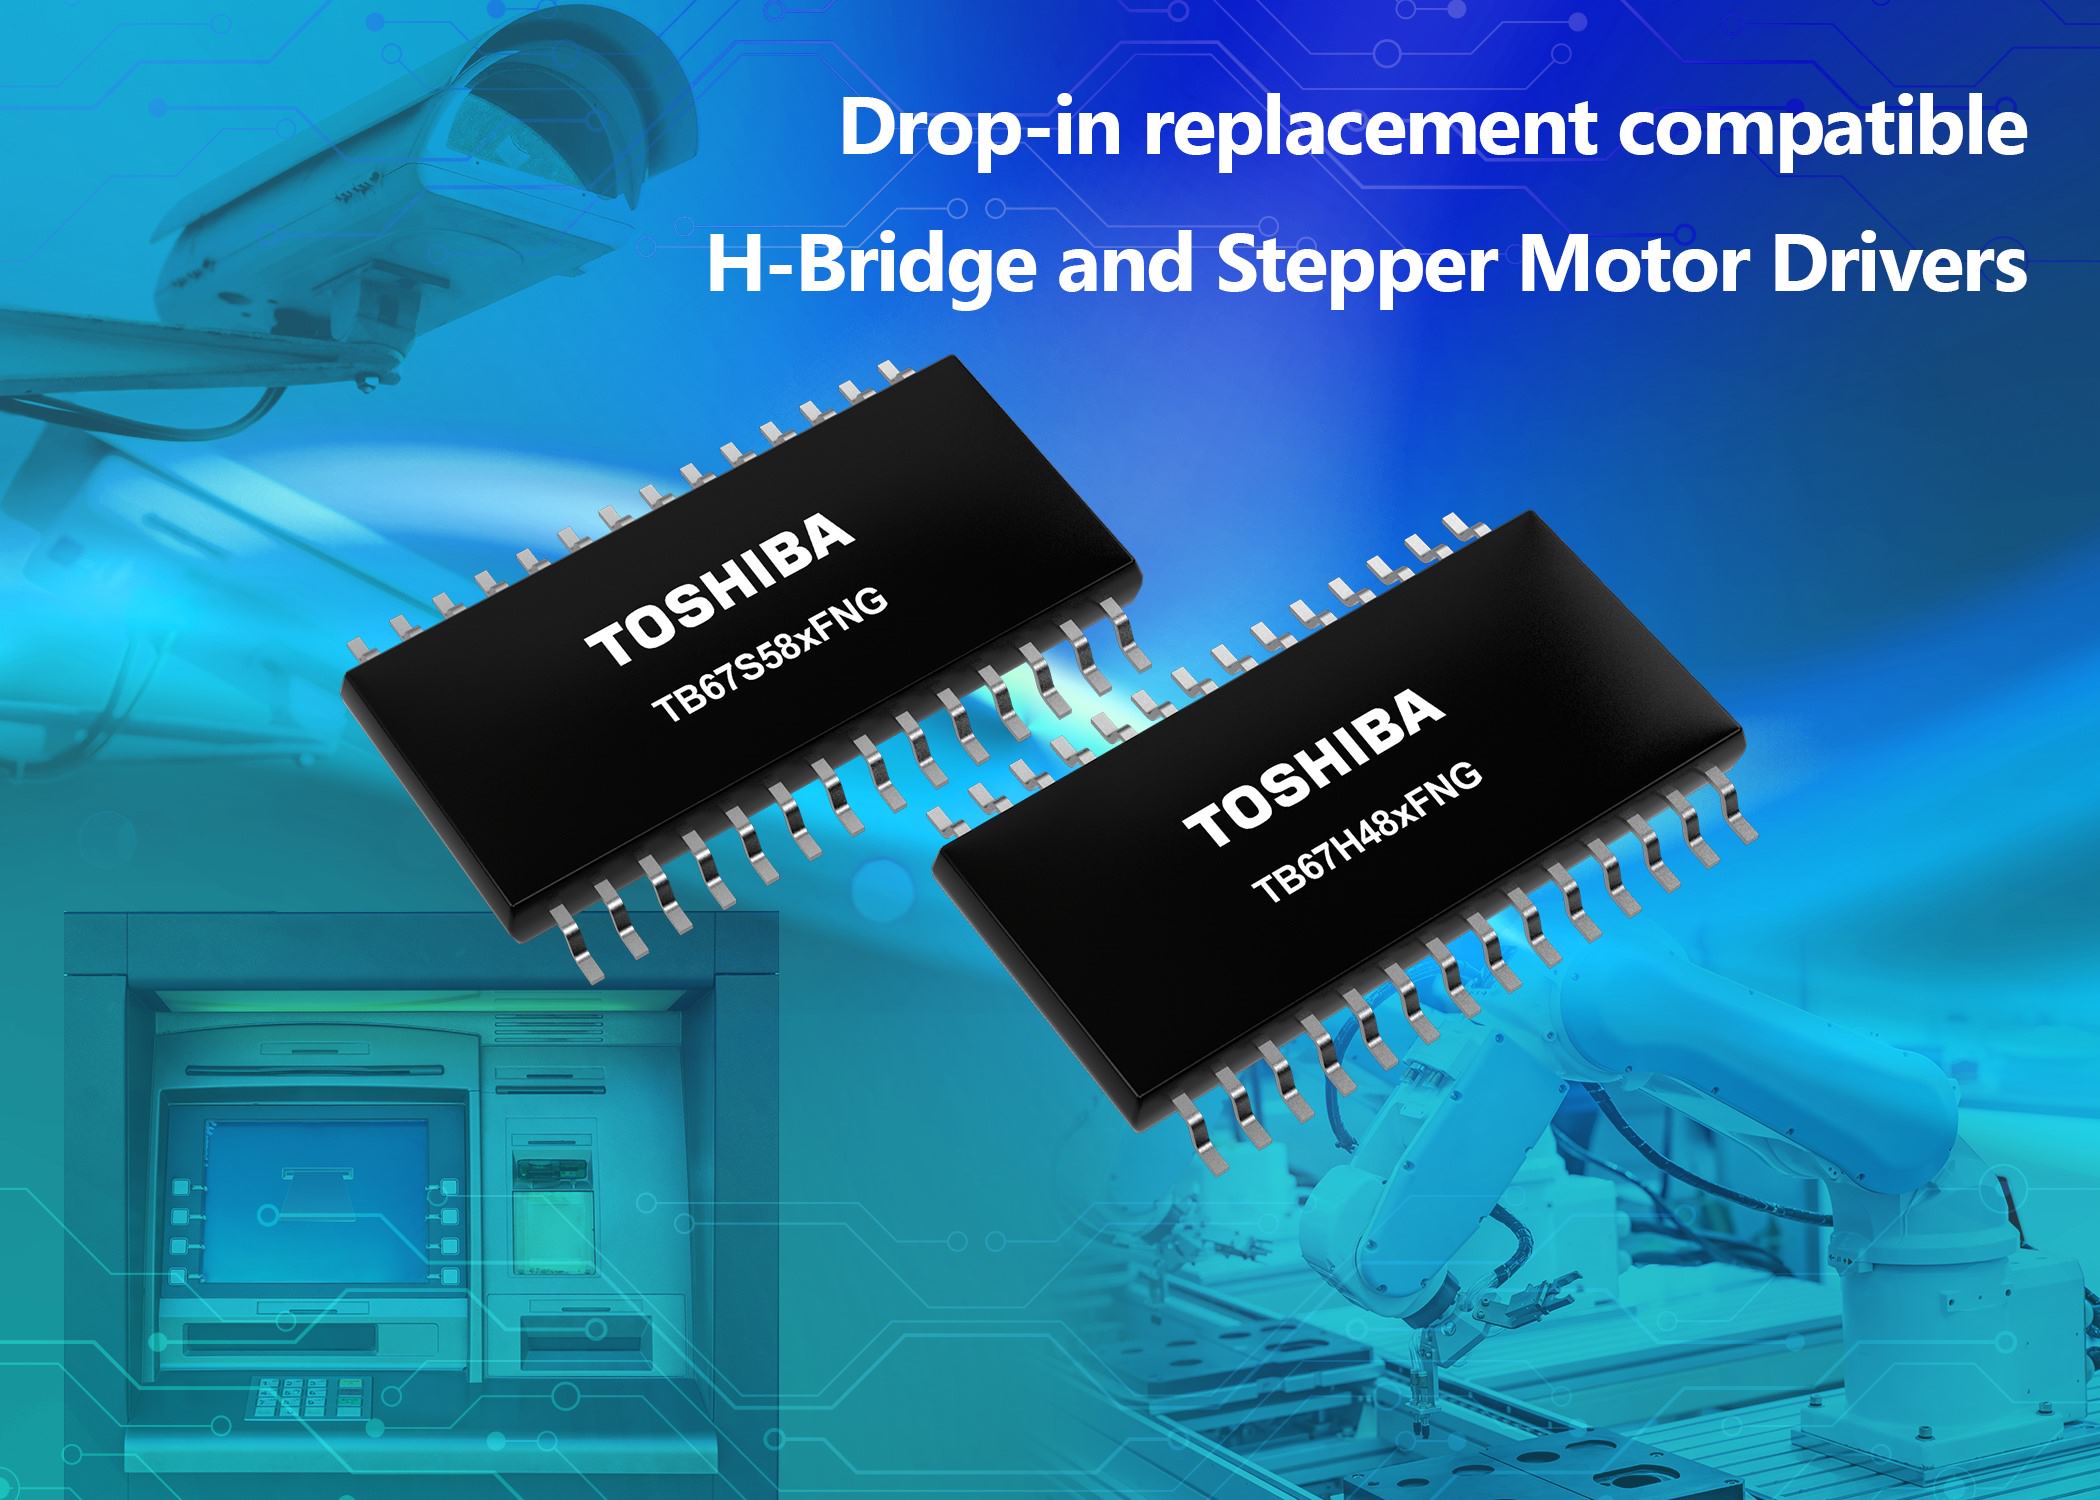 50V Motor Driver ICs Reduce Component Count, Save Board Space and Enable Second Sourcing Strategies